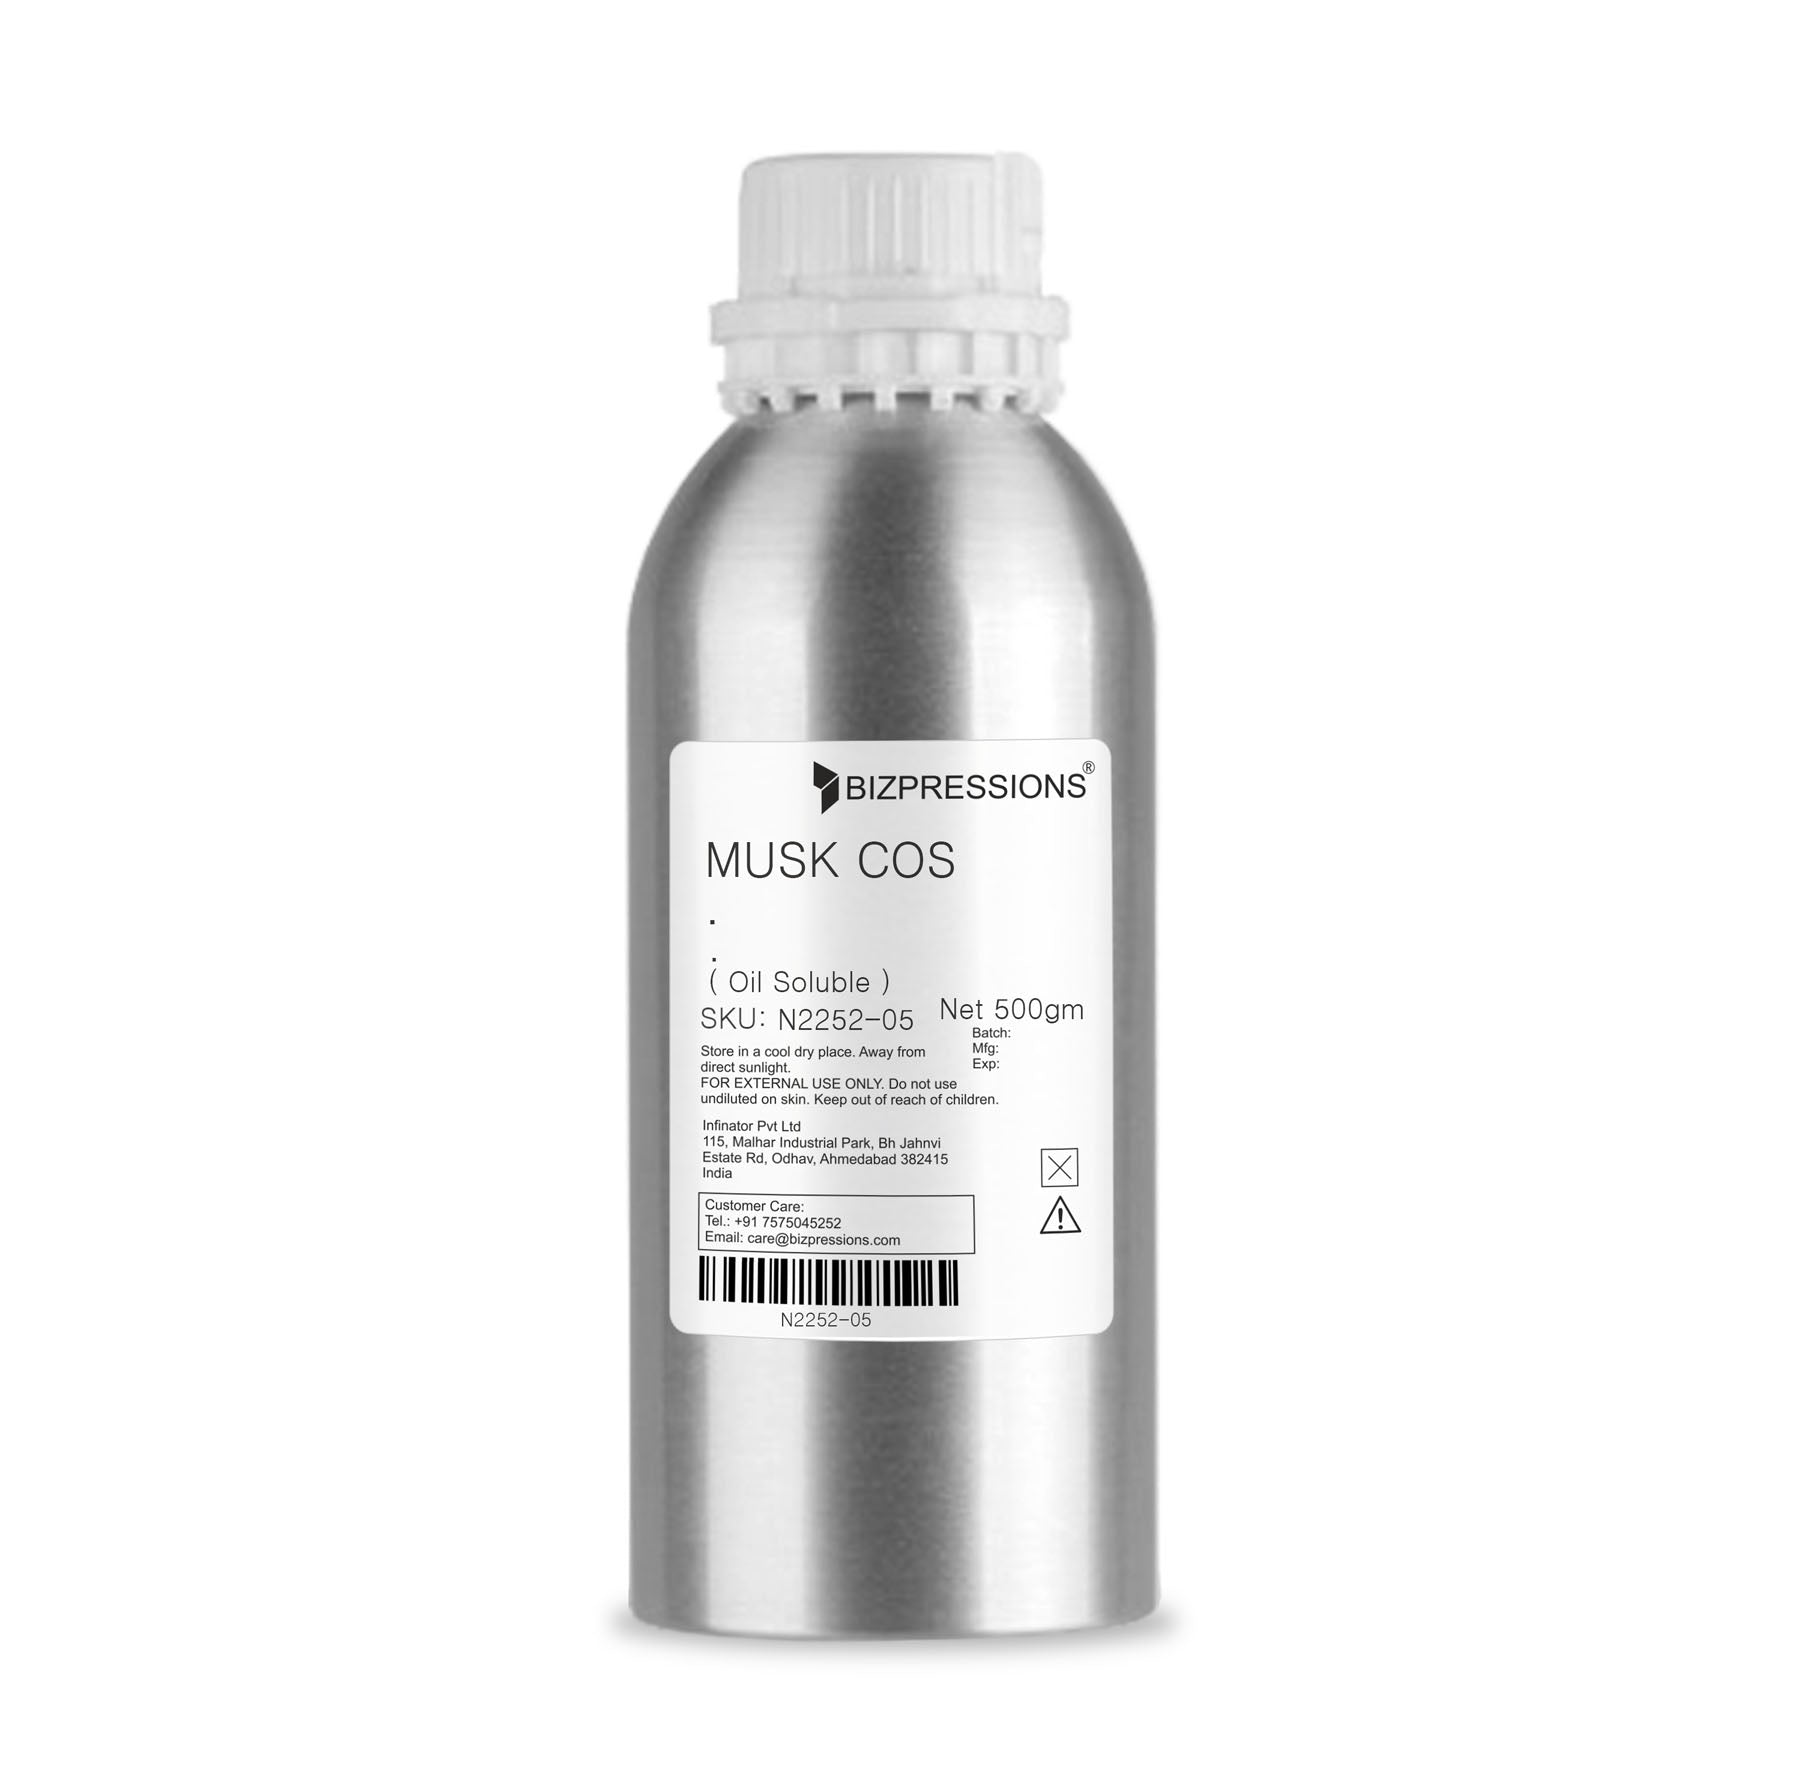 MUSK COS - Fragrance ( Oil Soluble ) - 500 gm